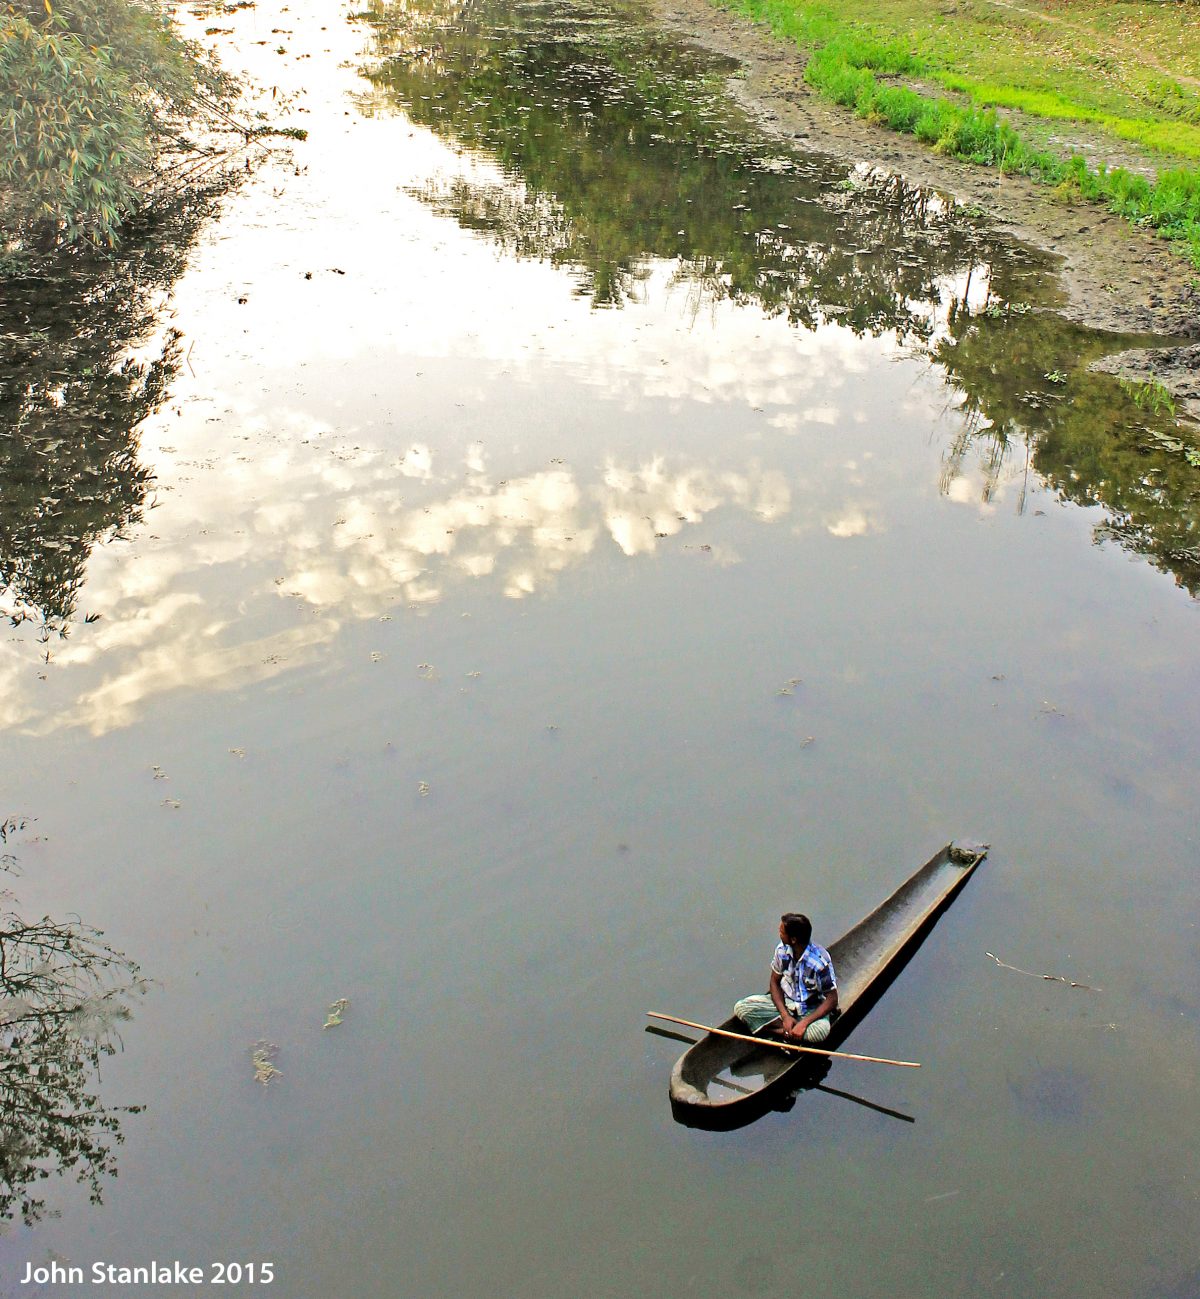 A Man And His Boat: The waterways of Bangladesh provide crucial trading and transport links throughout the country, and they are filled each day with boats of varying shapes and sizes. Here in Jessore district, John encountered this boatman enjoying a quiet moment on the water in the late afternoon.